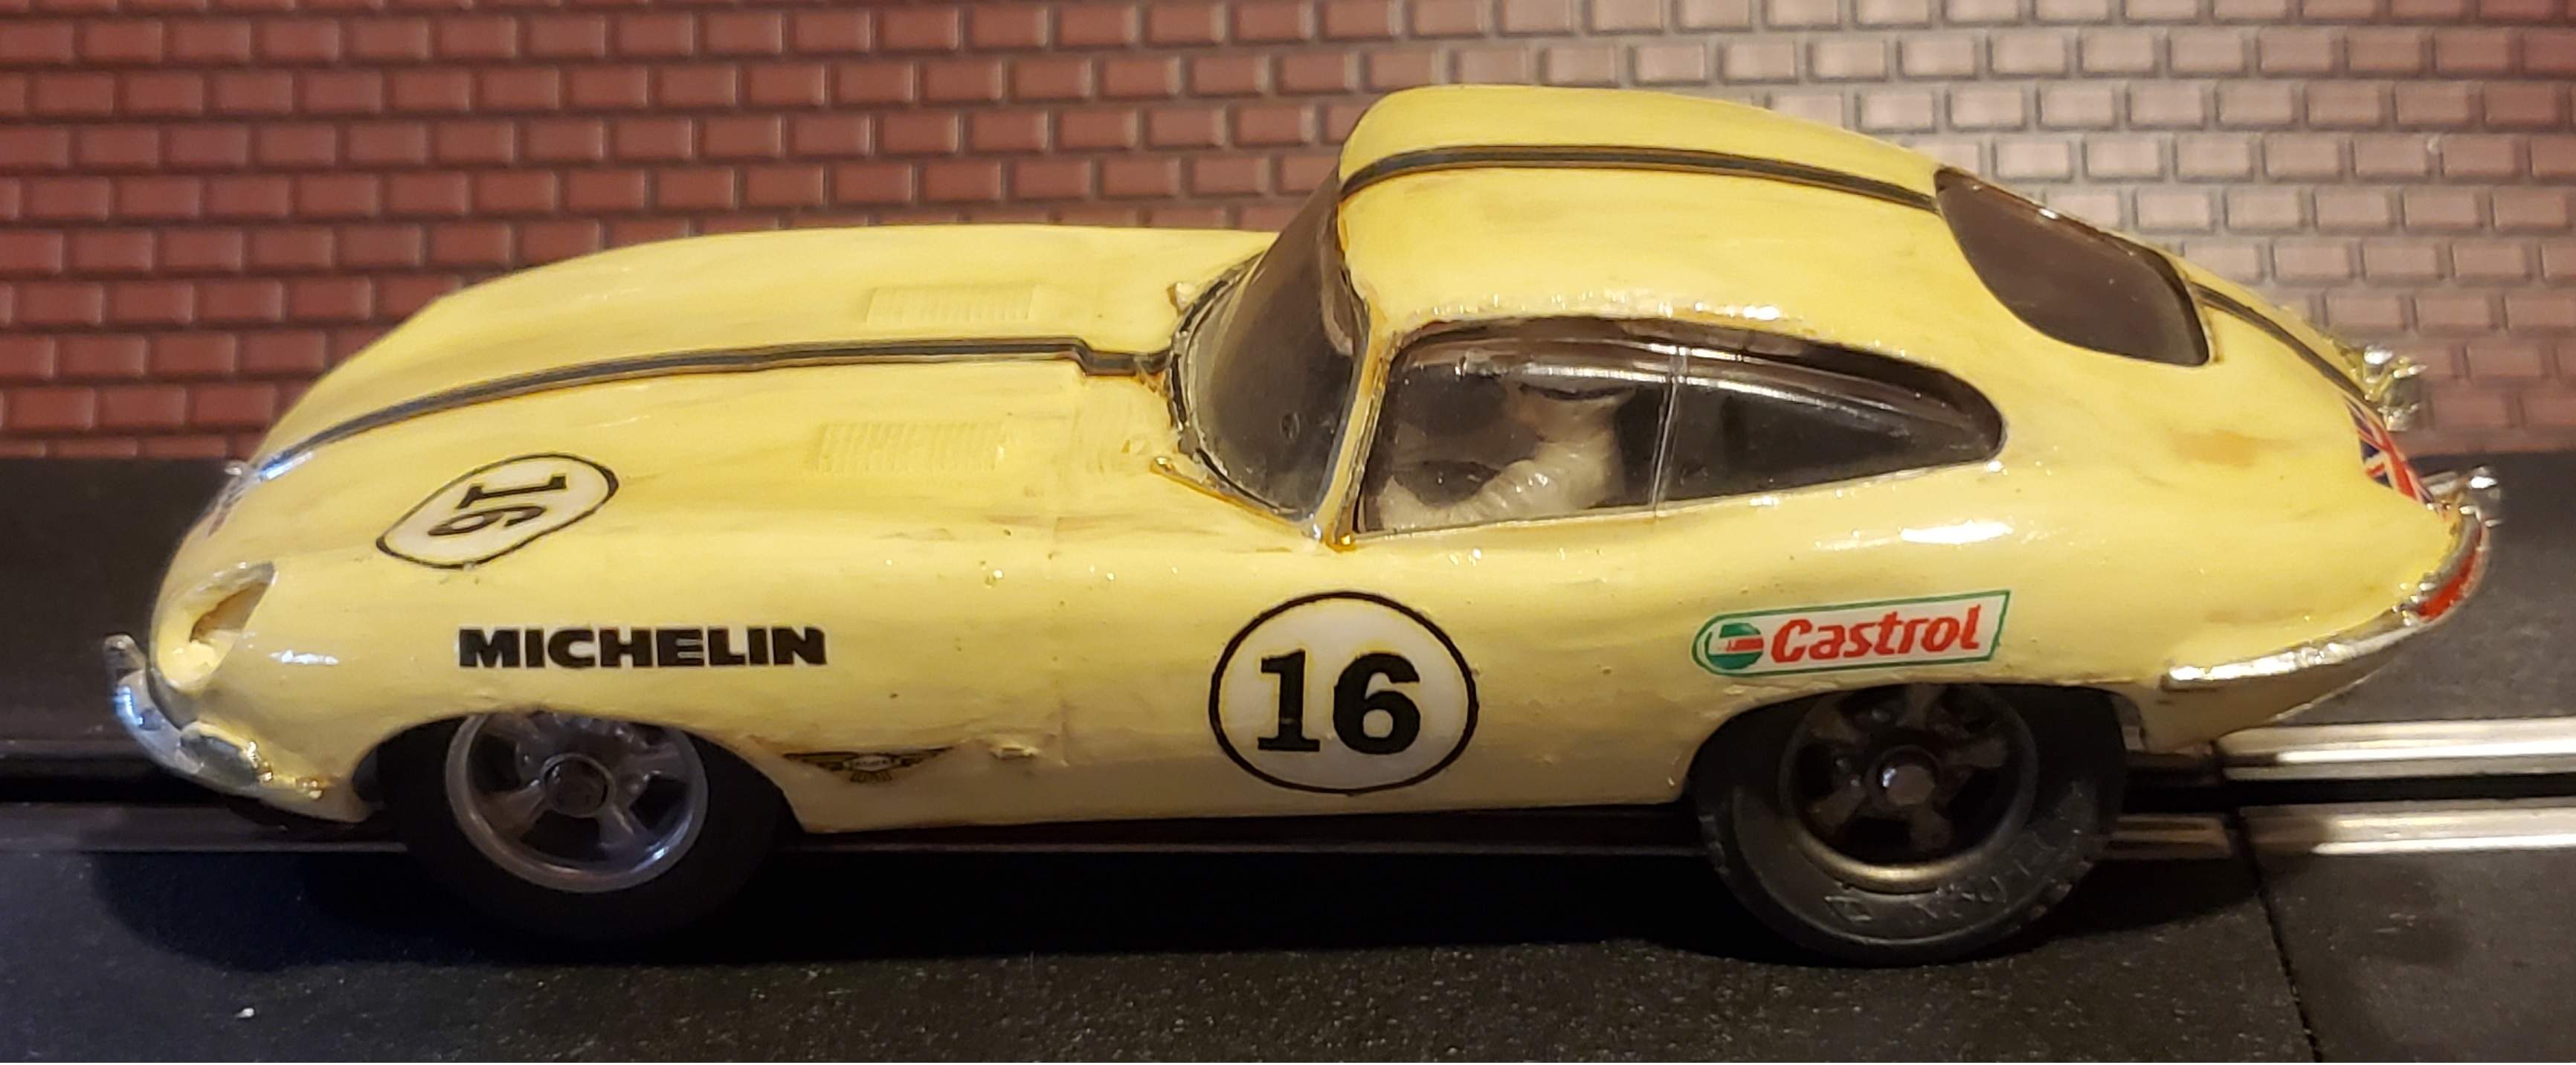 * SOLD 7-29-23 * * Sale, Save $20 off our Ebay store price  * 1964 Jaguar E-Type - 16